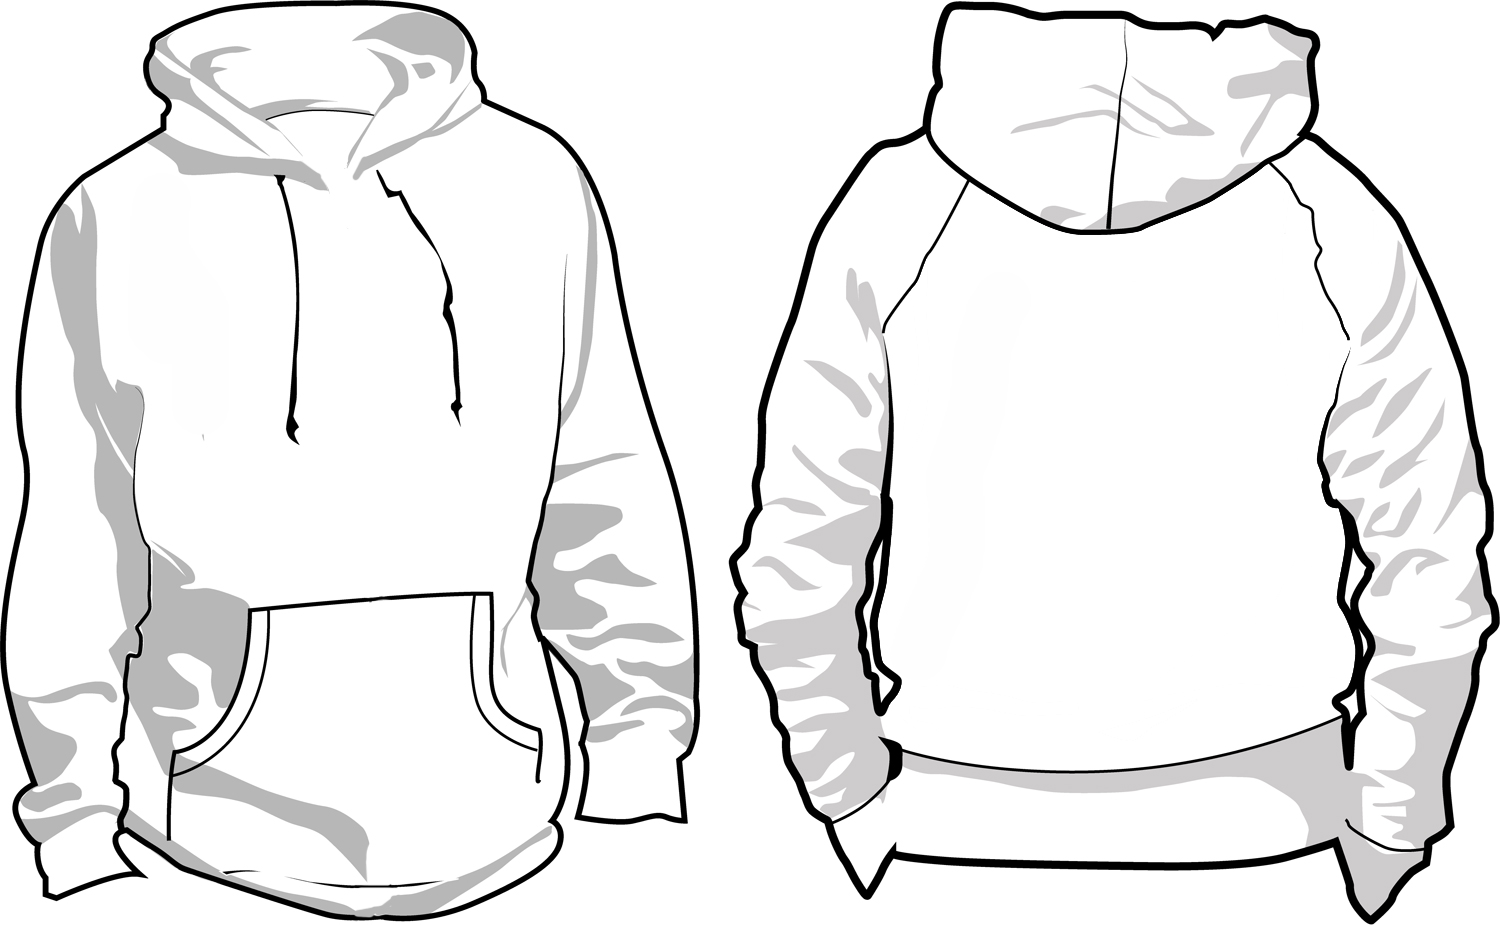 Free Blank Sweaters Cliparts, Download Free Clip Art, Free Clip Art on